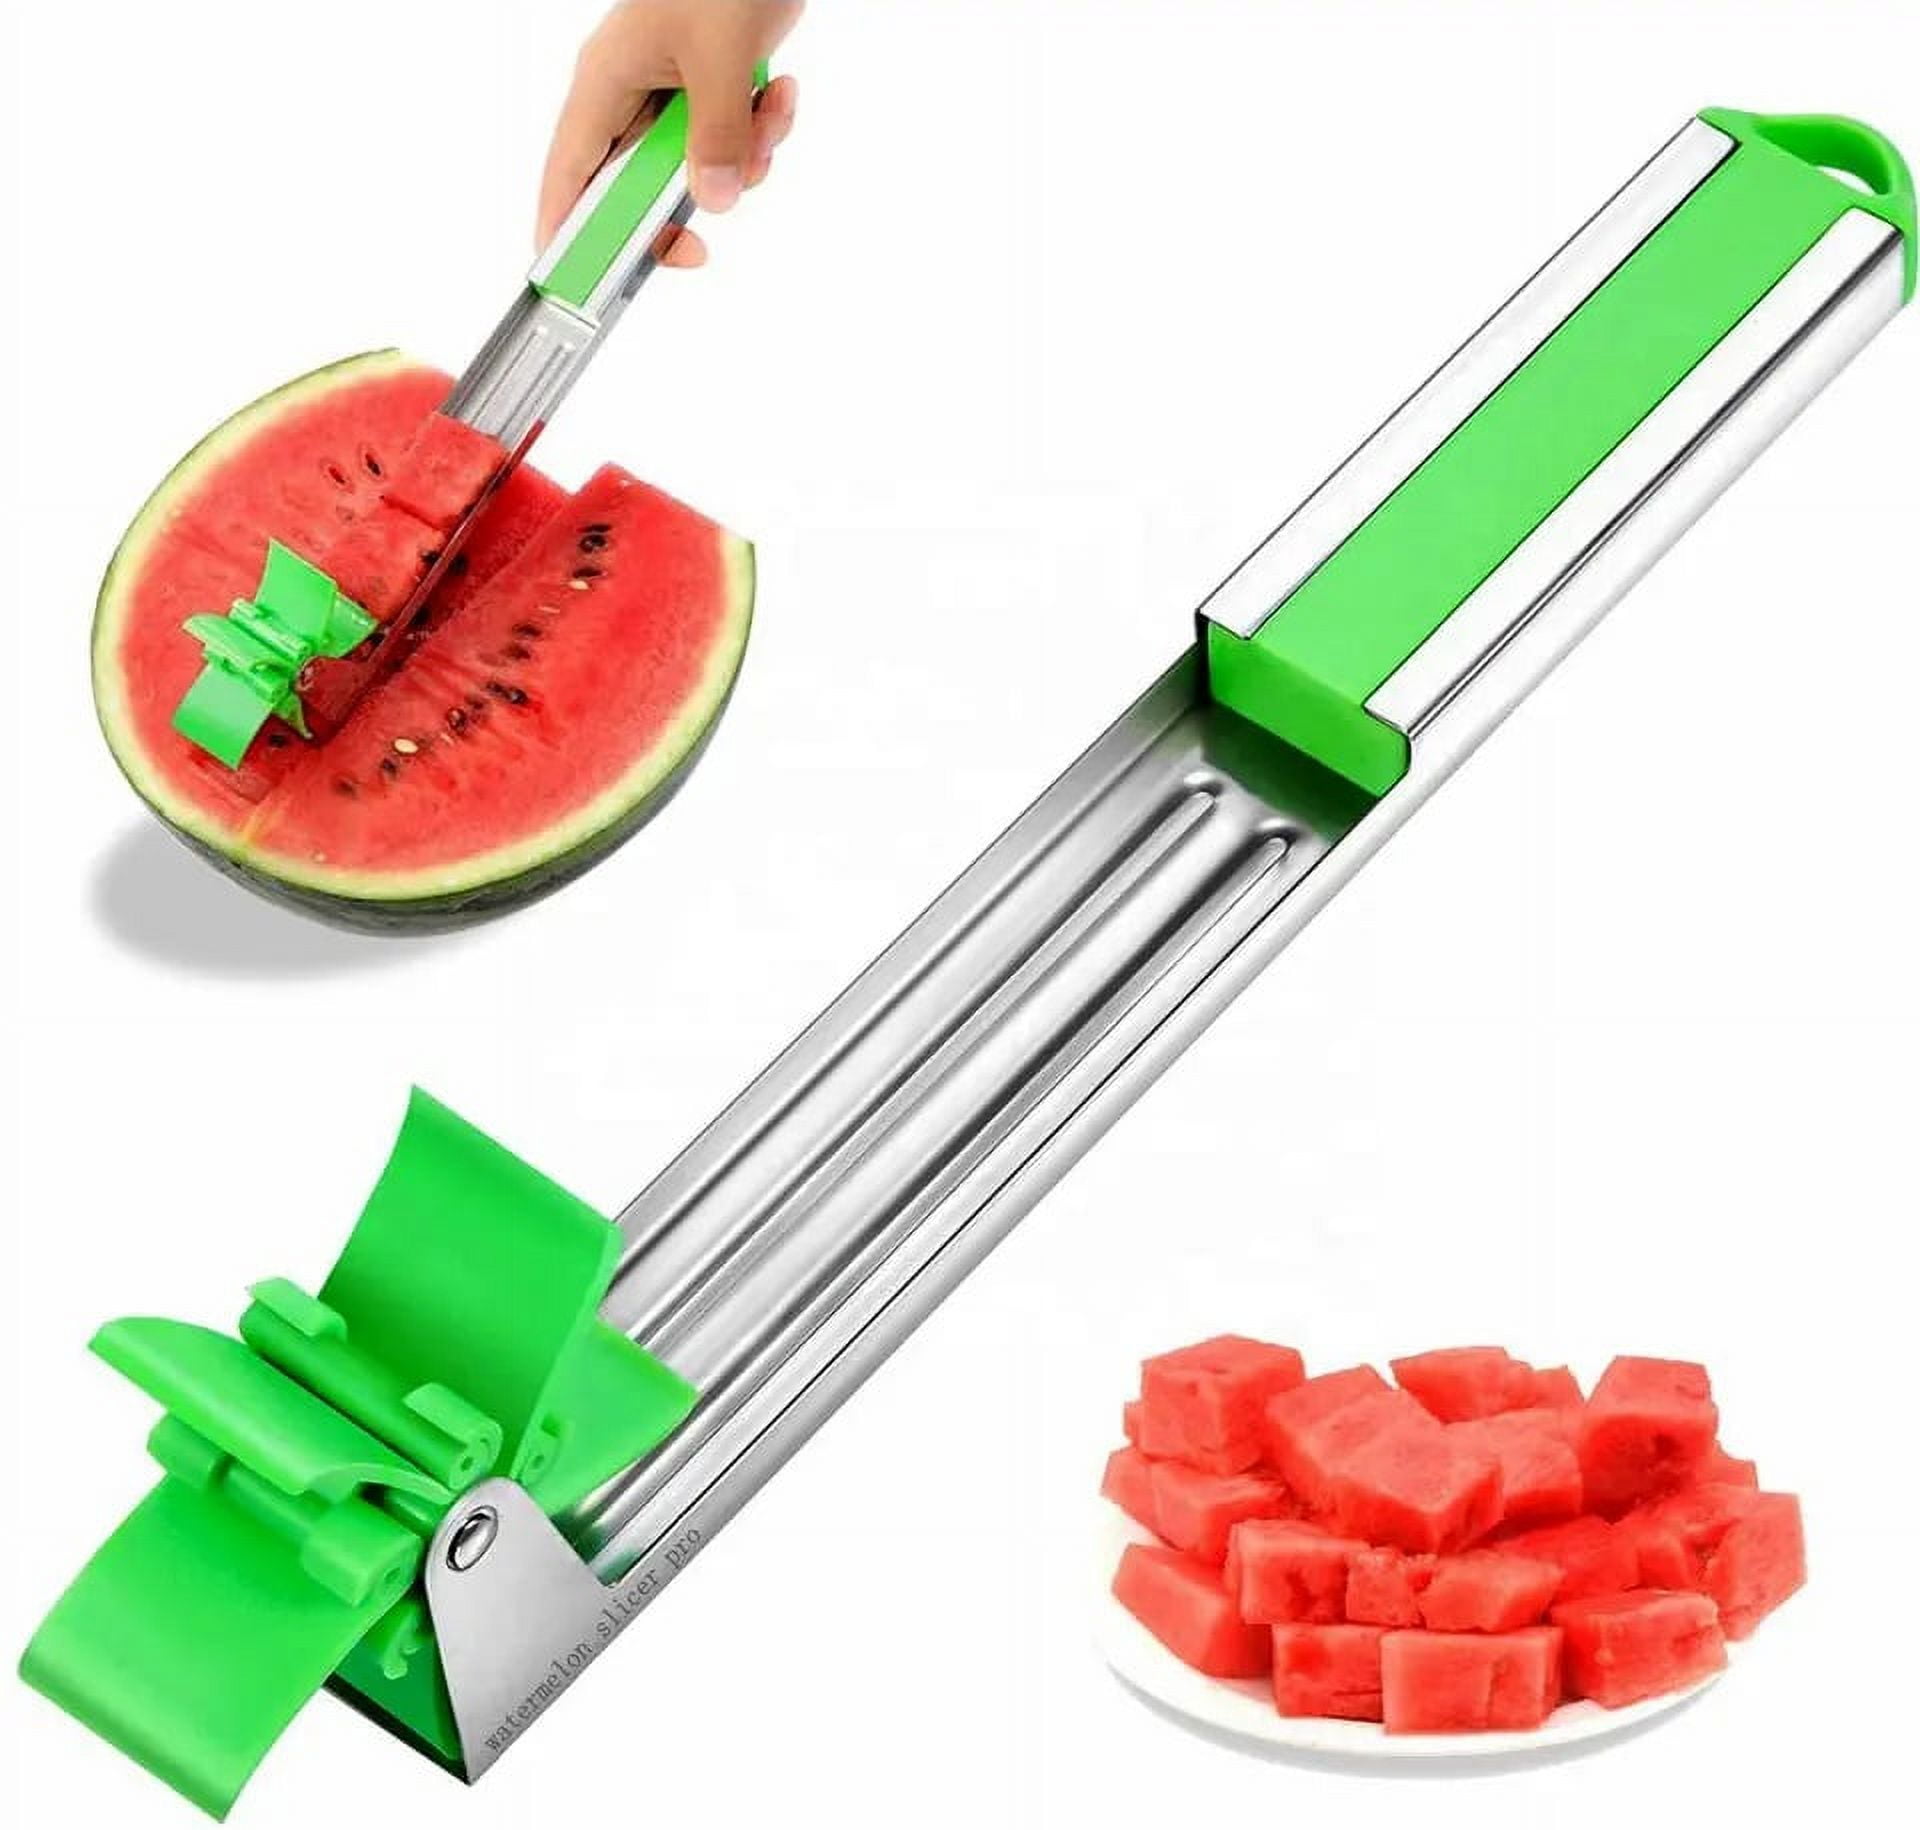 UDIYO 4Pcs Melon Baller Scoop Set,Professional 2 In 1 Stainless Steel  Watermelon Cutter Fruit Carving Tools Set,Fruit Scooper Seed Remover  Watermelon Knife for Dig Pulp Separator Fruit Slicer 